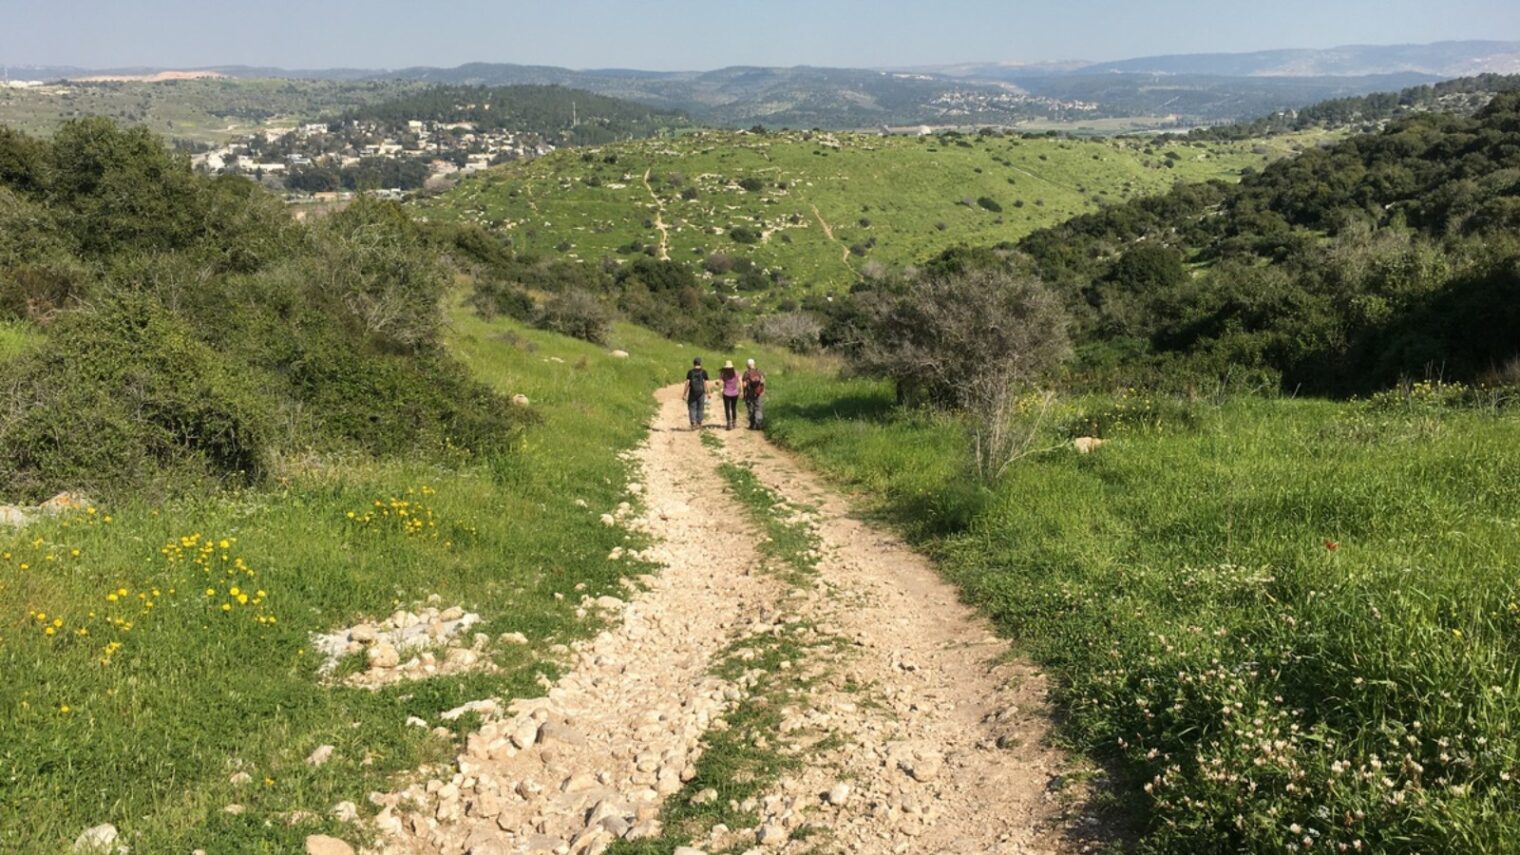 Hikers in the Lupine Hill area of the Elah Valley where David defeated Goliath. Photo by Brian Blum